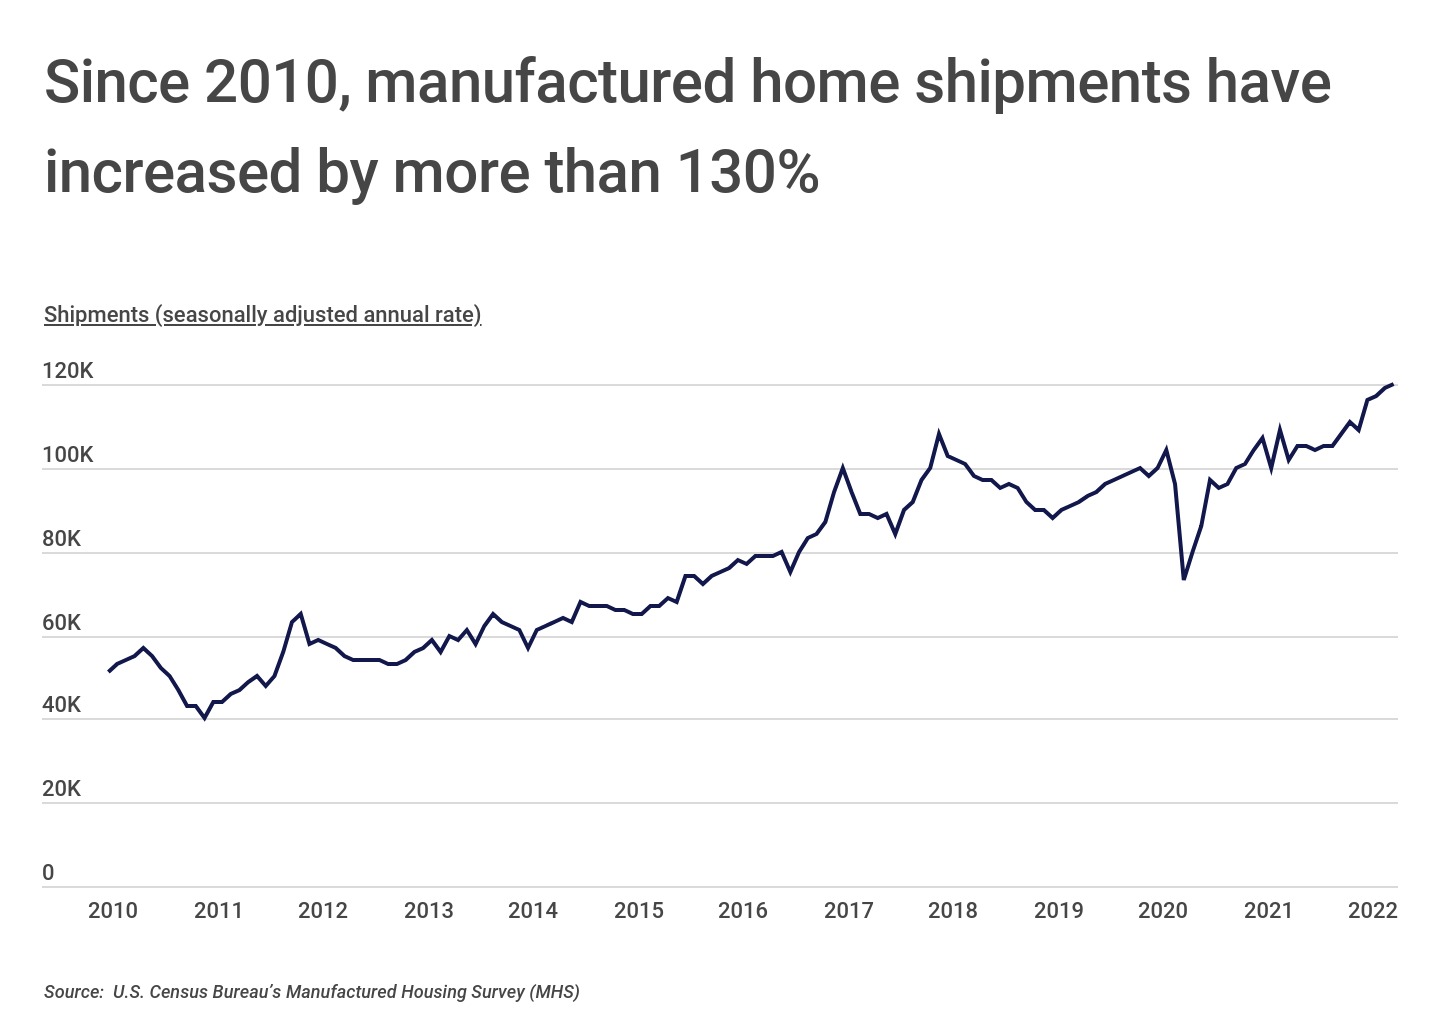 Chart1_Manufactured home shipments have increased by 130%+ since 2010